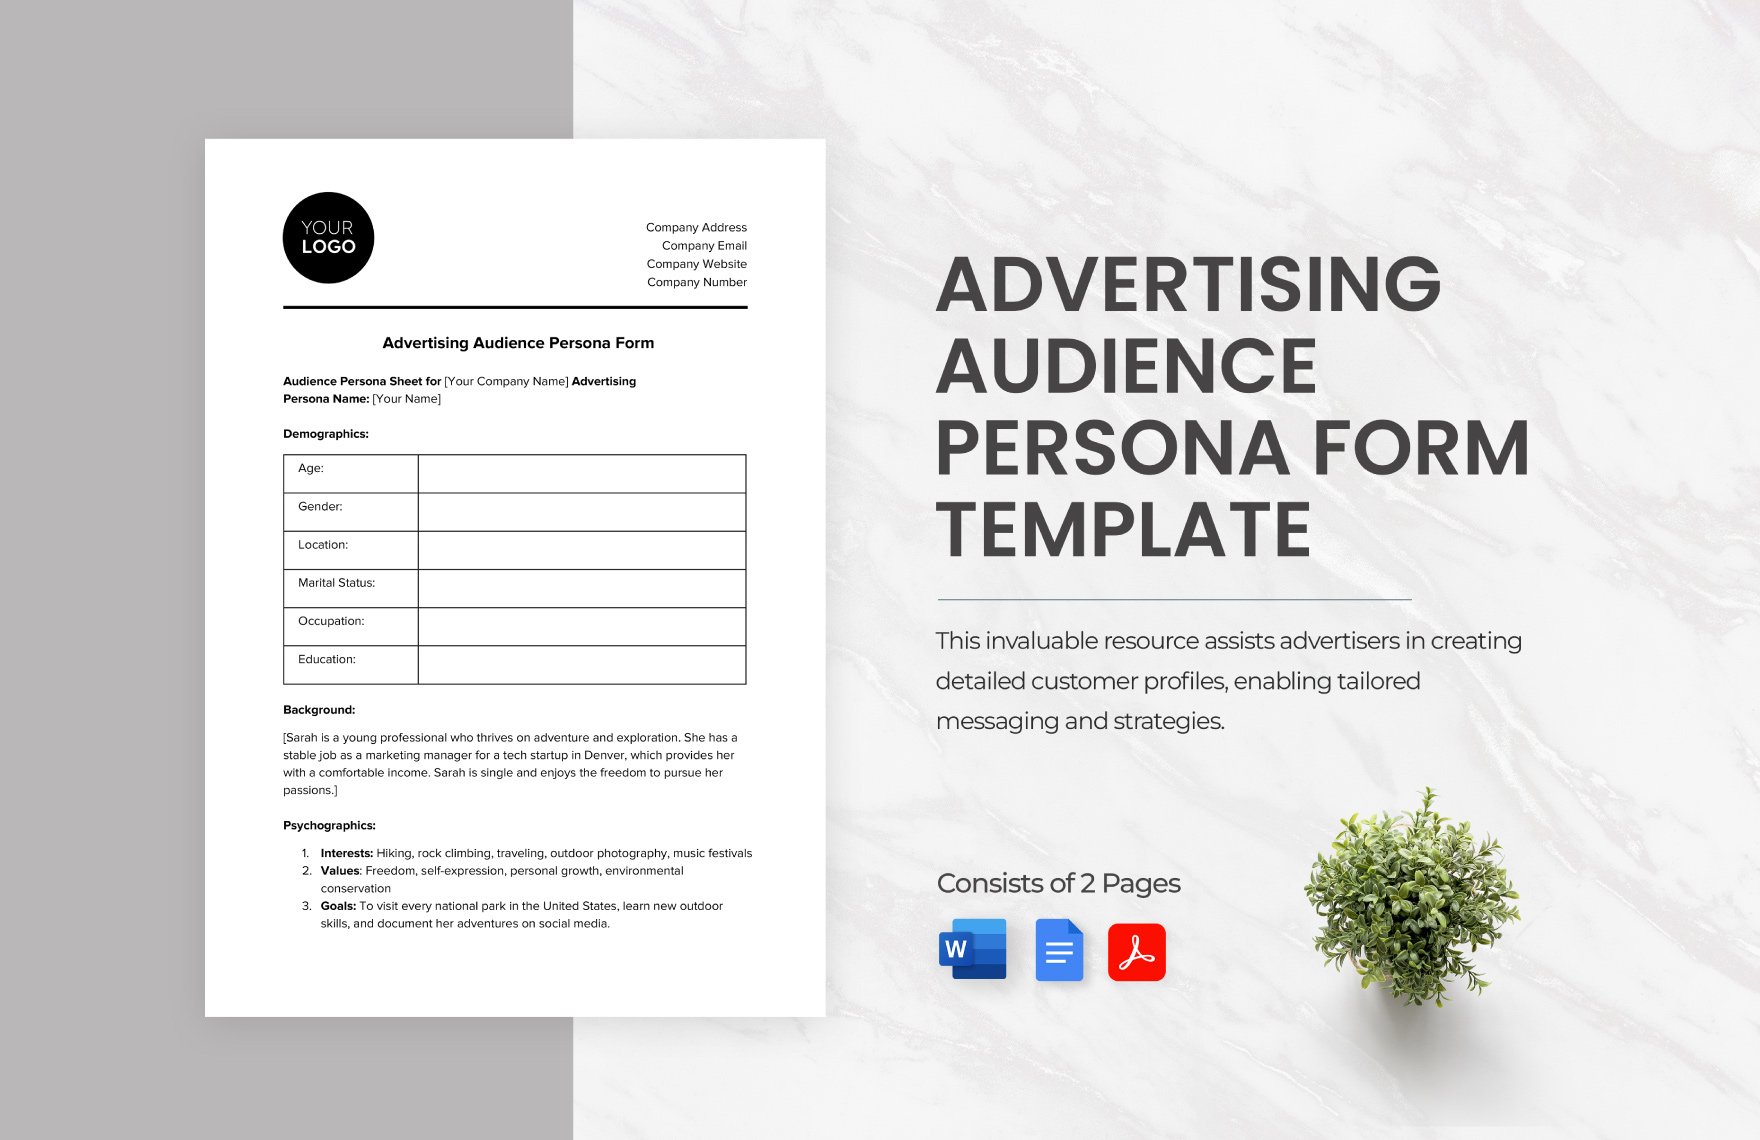 Advertising Audience Persona Form Template in Word, Google Docs, PDF